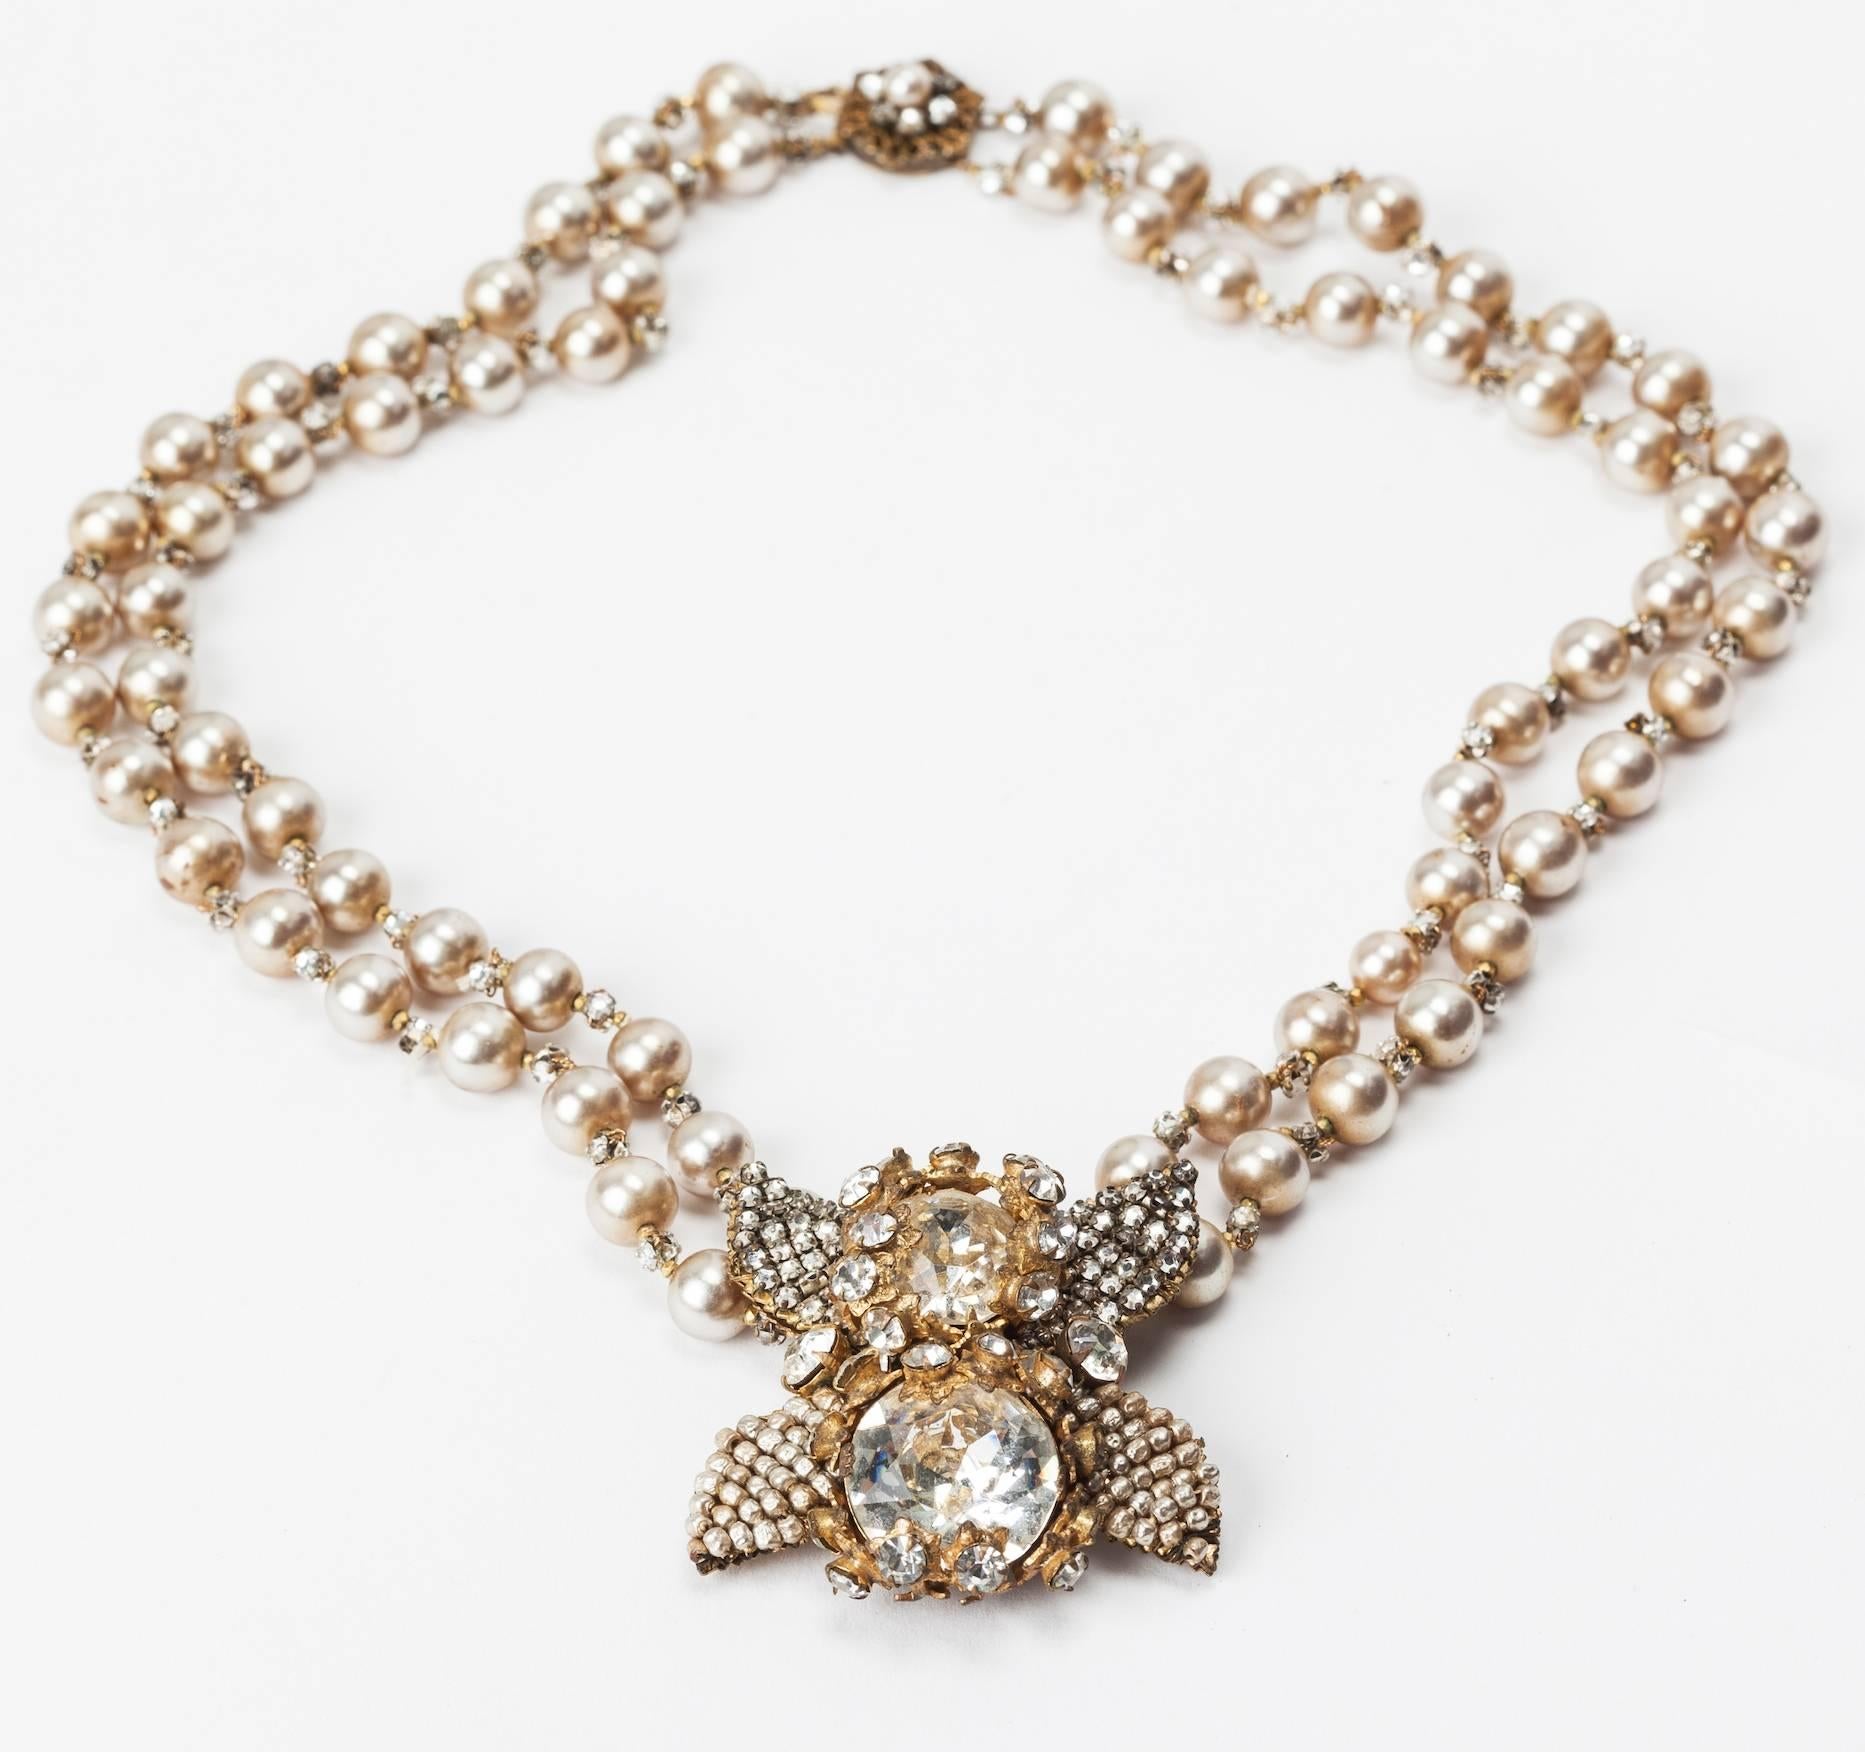 Superb Miriam Haskell two strand long faux pearl necklace. The signature graduated pearls spaced with back to back sewn rose monte crystals.The center focal pendant of two large faceted crystal paste stones set in paved Russian gilt filigrees. These